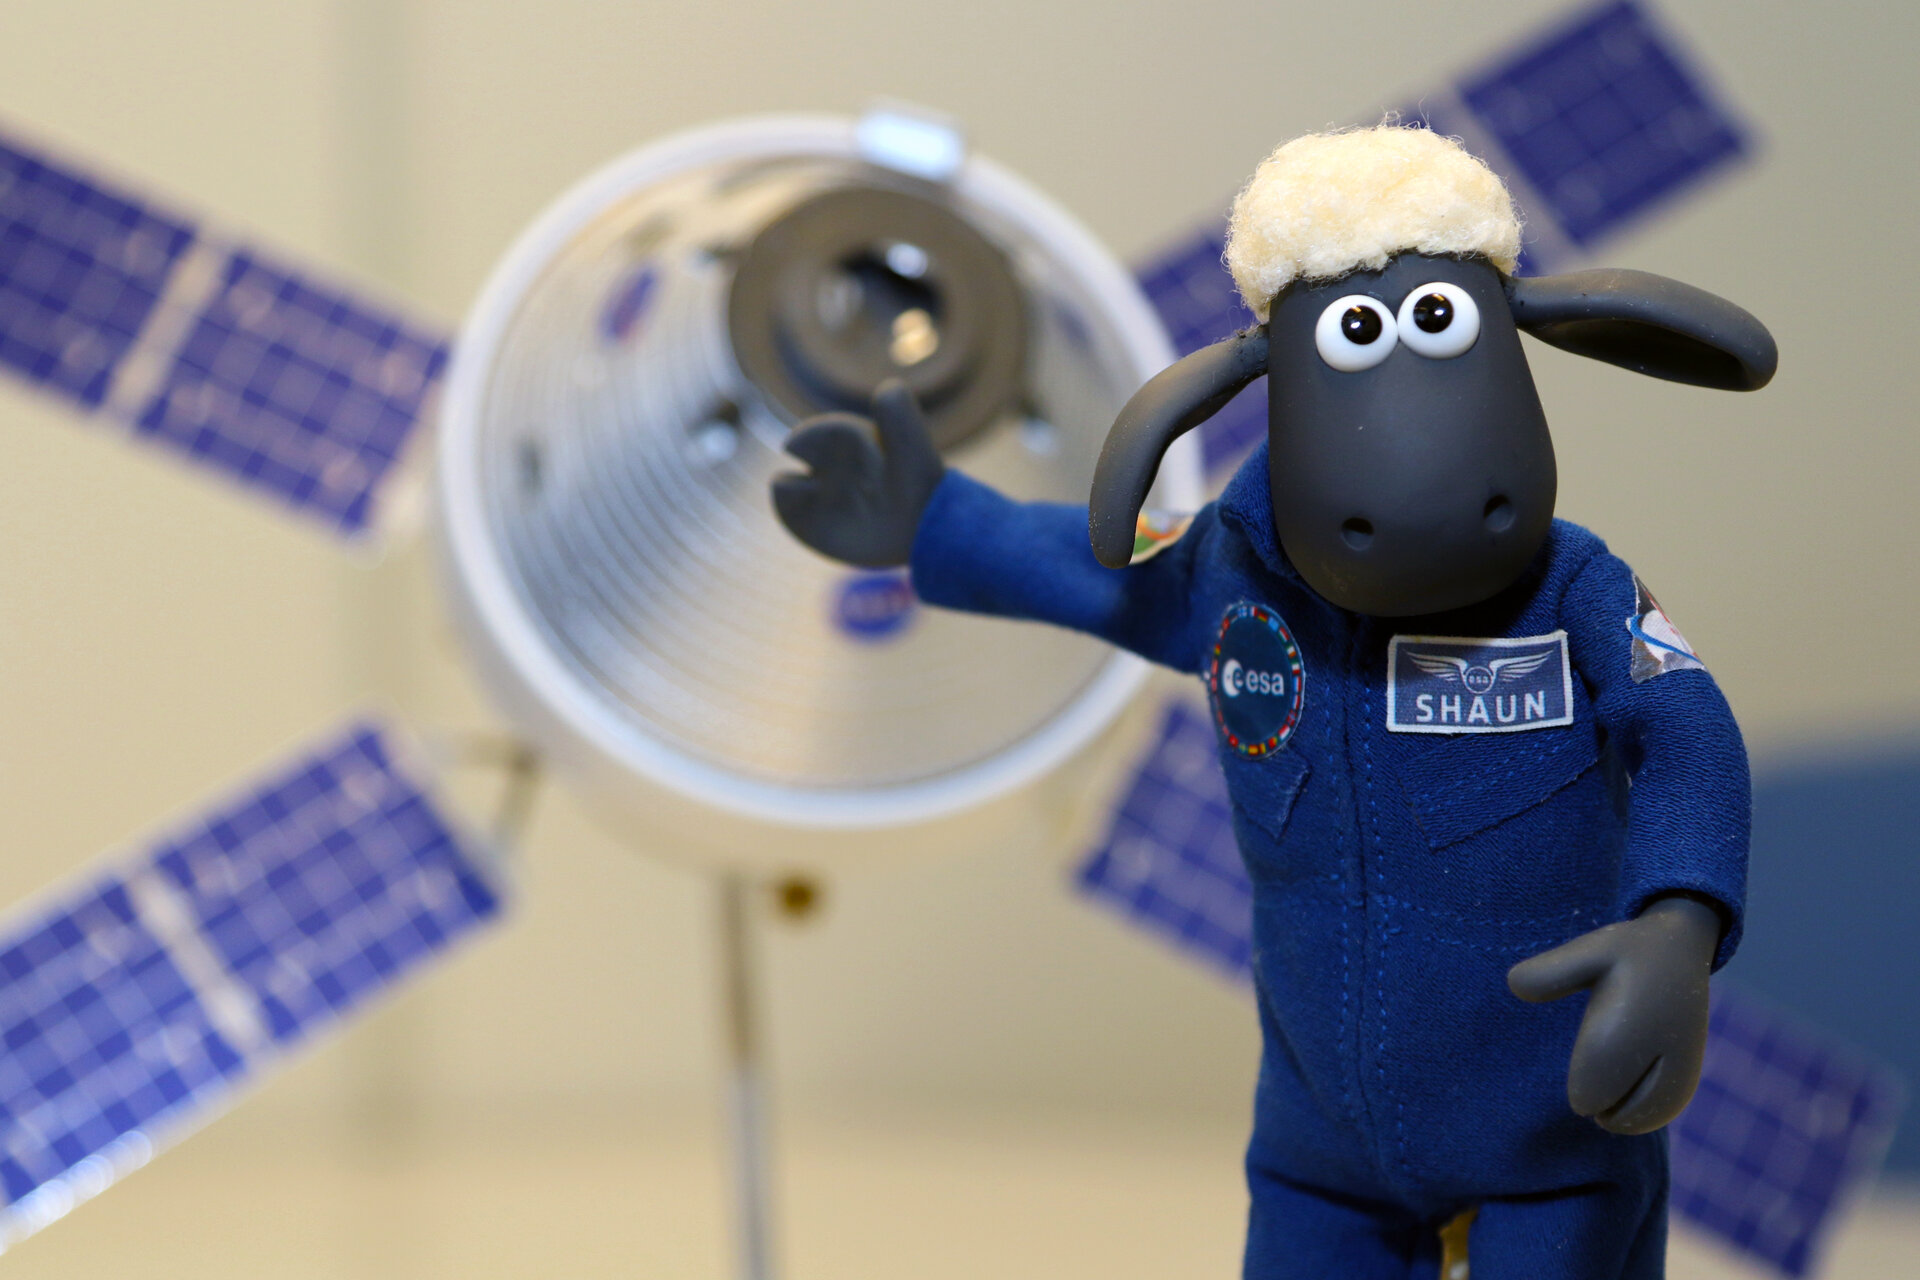 How far will Shaun’s career in space go? Only time wool tell.